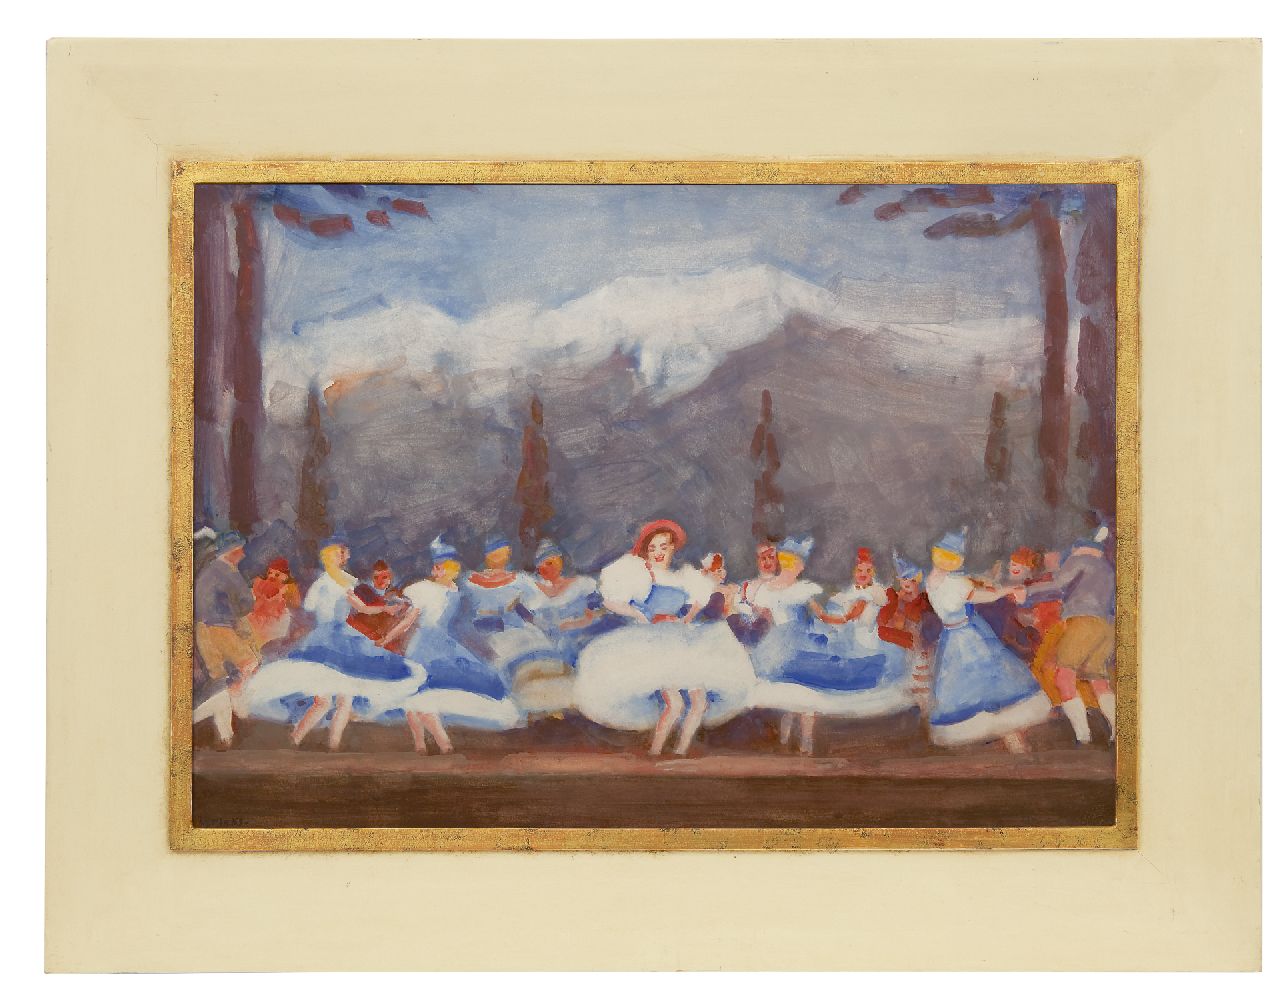 Maks C.J.  | Cornelis Johannes 'Kees' Maks | Watercolours and drawings offered for sale | Tiroler ballet at the Bouwmeester Revue, gouache on paper 48.0 x 68.0 cm, signed l.l. and painted ca. 1938